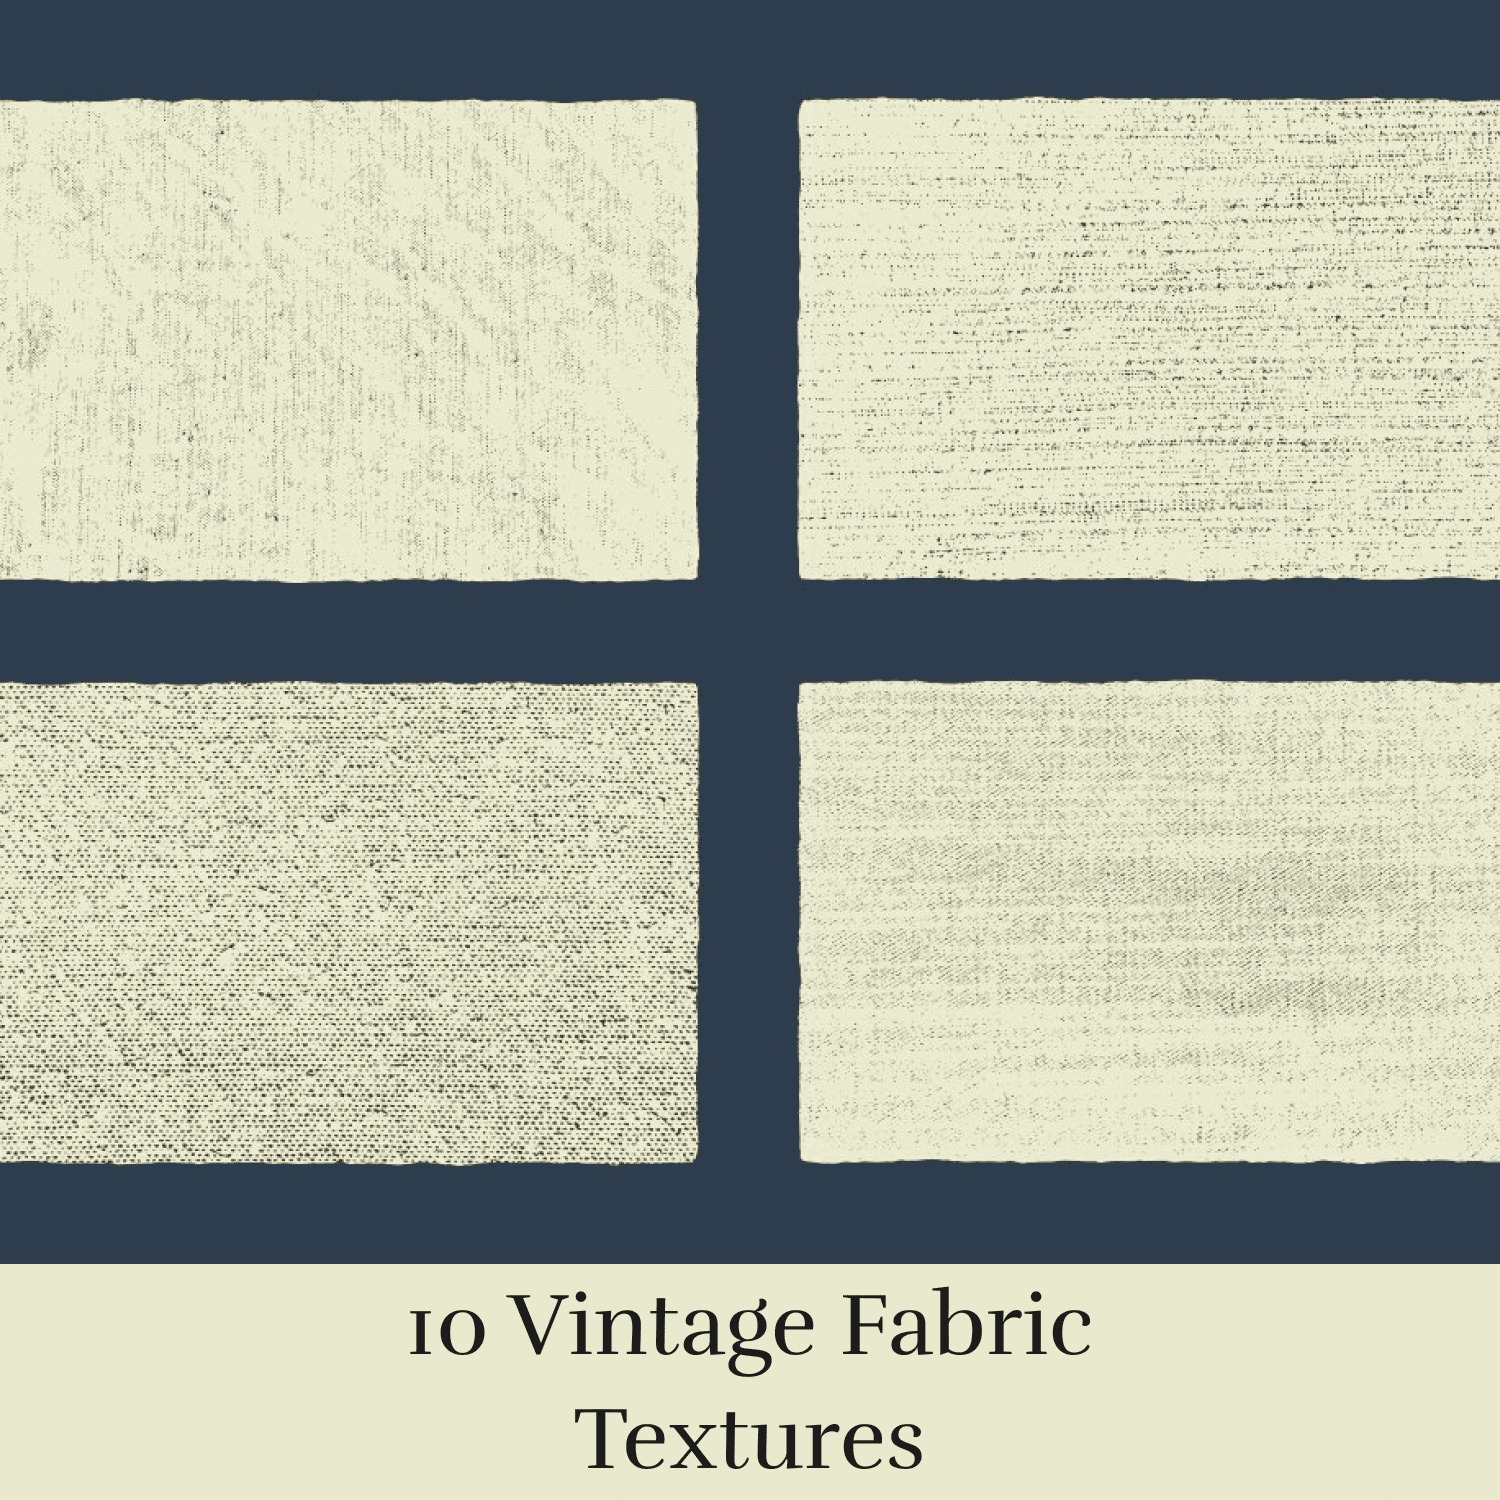 10 Vintage Fabric Textures cover.